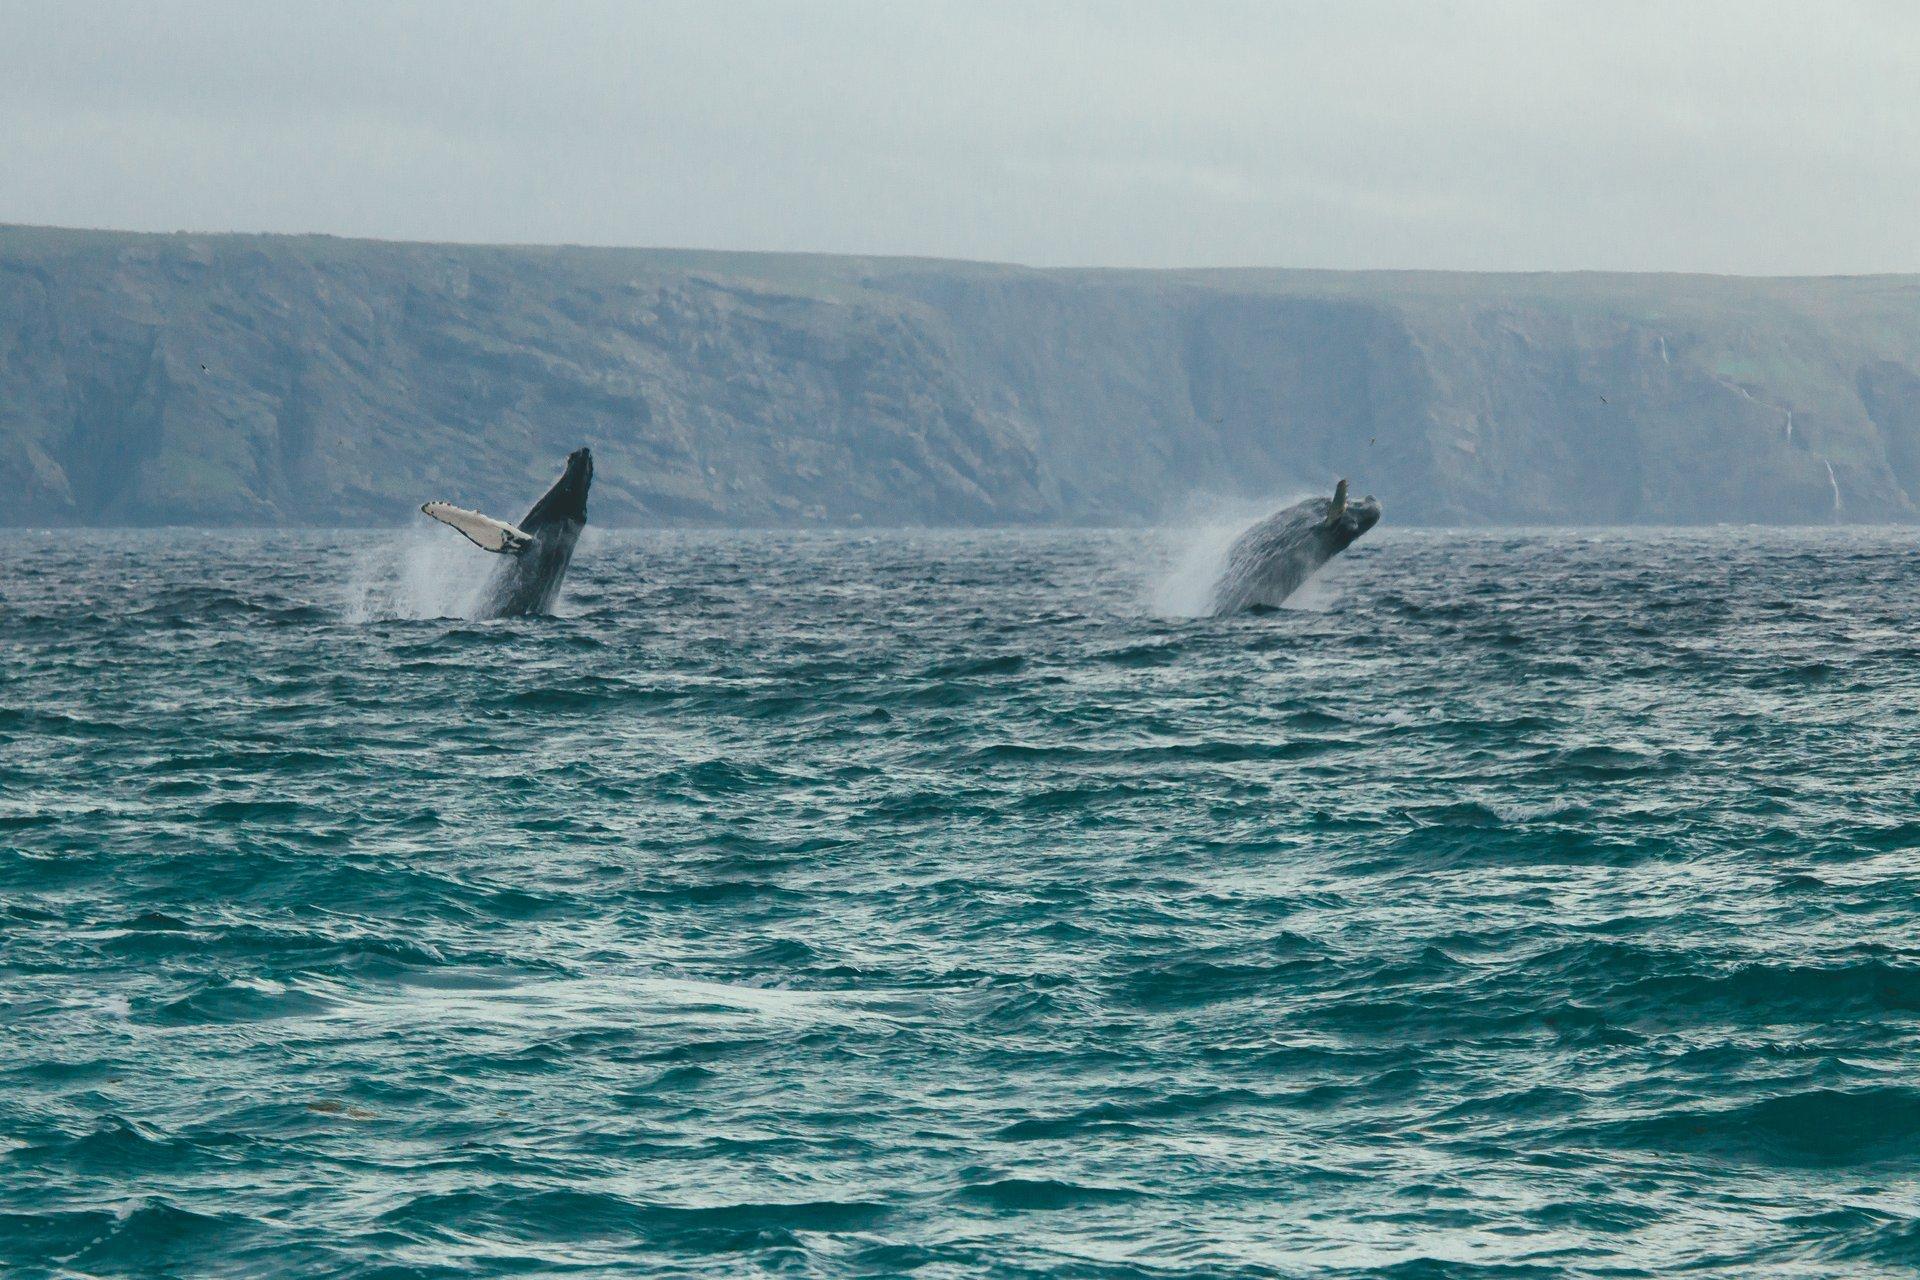 Twenty-two species of whale call the waters surrounding Newfoundland and Labrador Home.